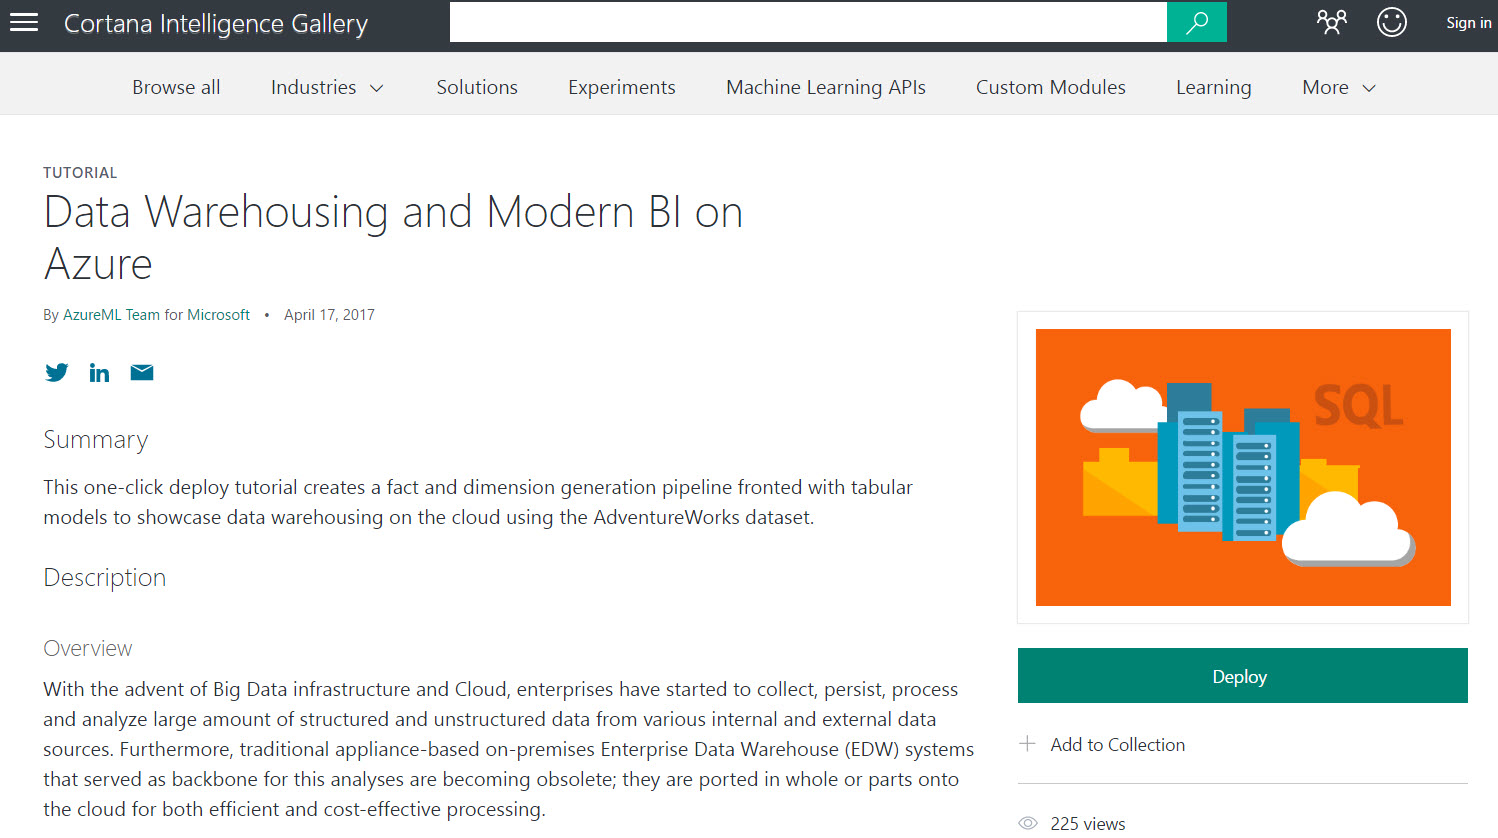 Microsoft Hopes To Unify Big Data And Analytics In Newly Announced Suite |  TechCrunch